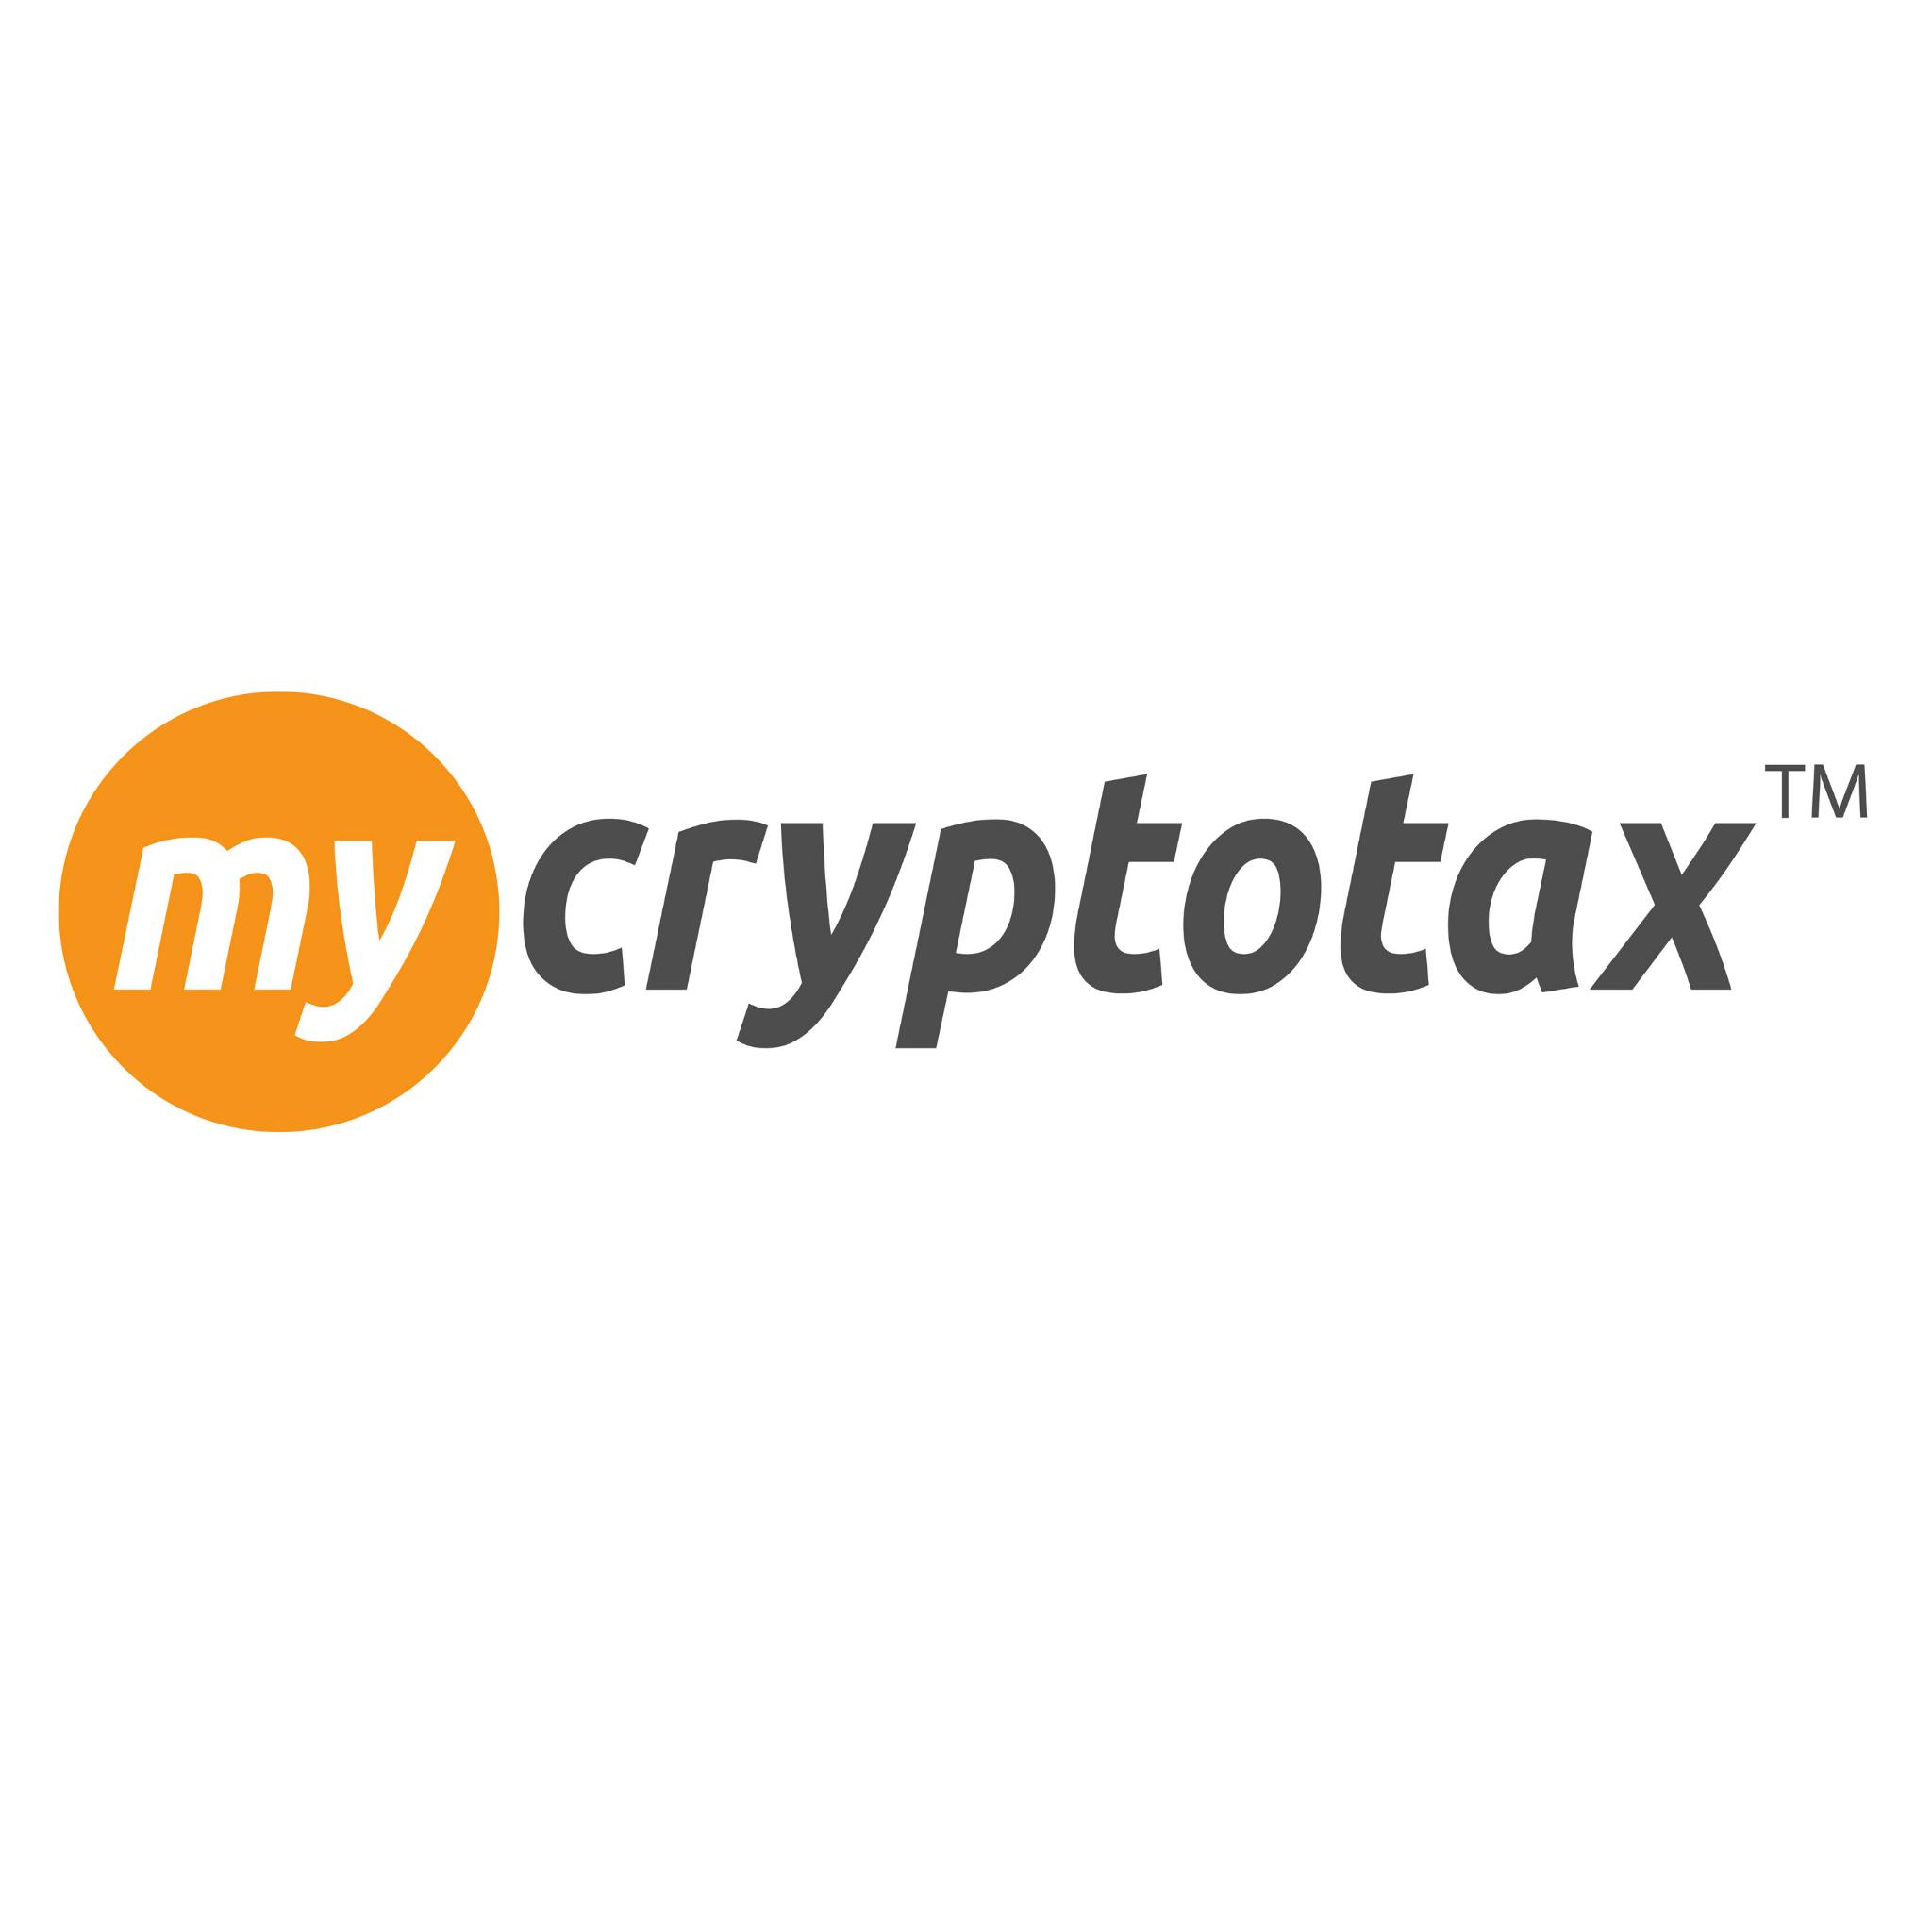 My Crypto Tax is an accountancy firm specialised in cryptocurrency tax and blockchain accounting based in UK.